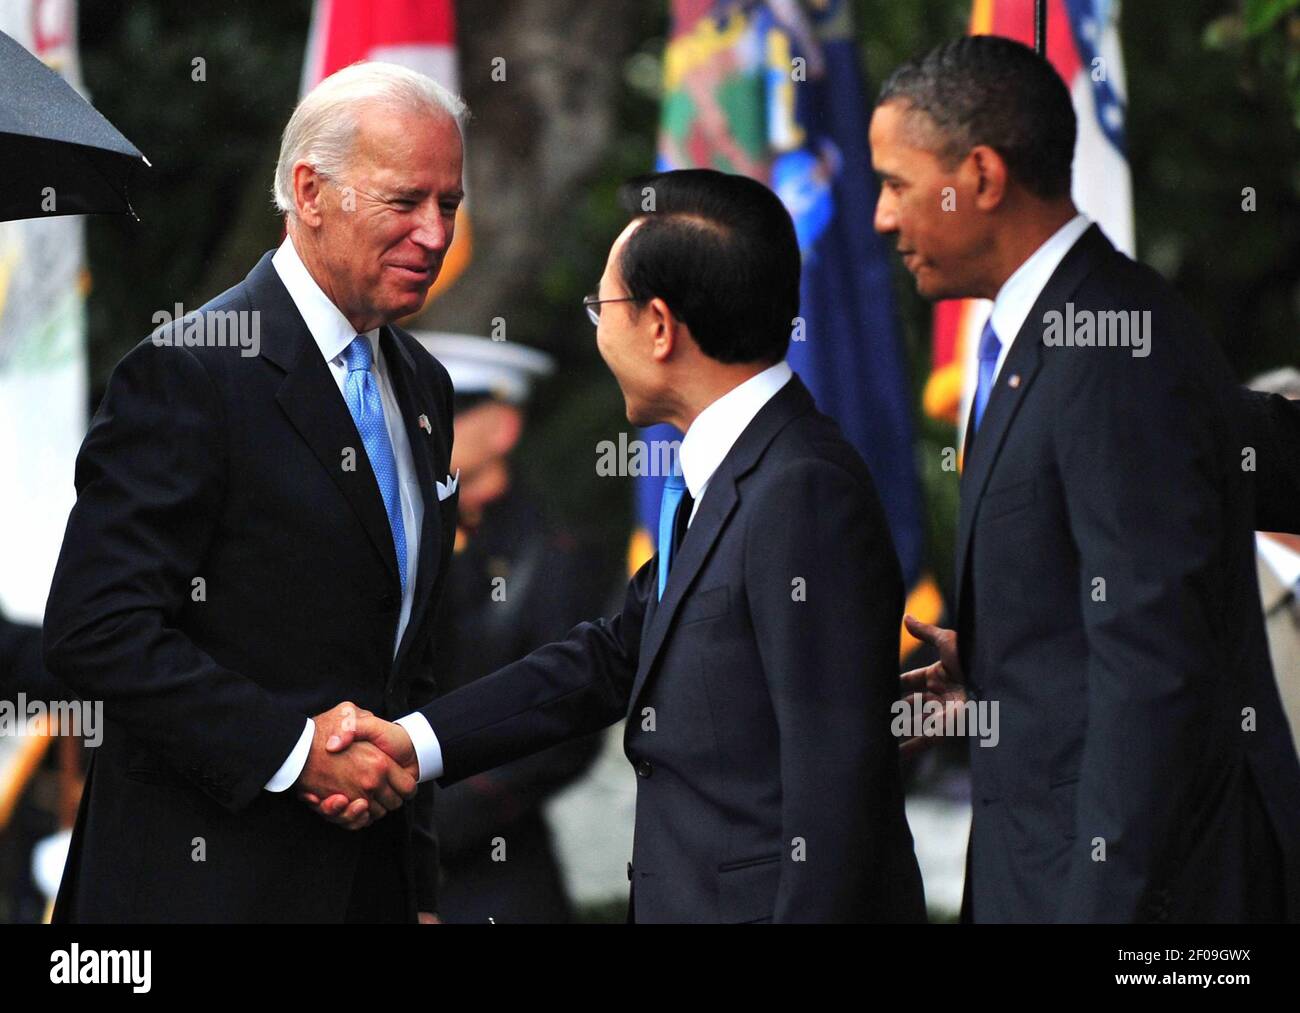 13 October 2011 - Washington, D.C. - U.S. Vice President Joe Biden greets South Korean President Lee Myung-bak as President Barack Obama watches during an arrival ceremony on the South Lawn at the White House in Washington, D.C. on October 13, 2011. Photo Credit: Kevin Dietsch/Pool/Sipa Press/1110141421 Stock Photo